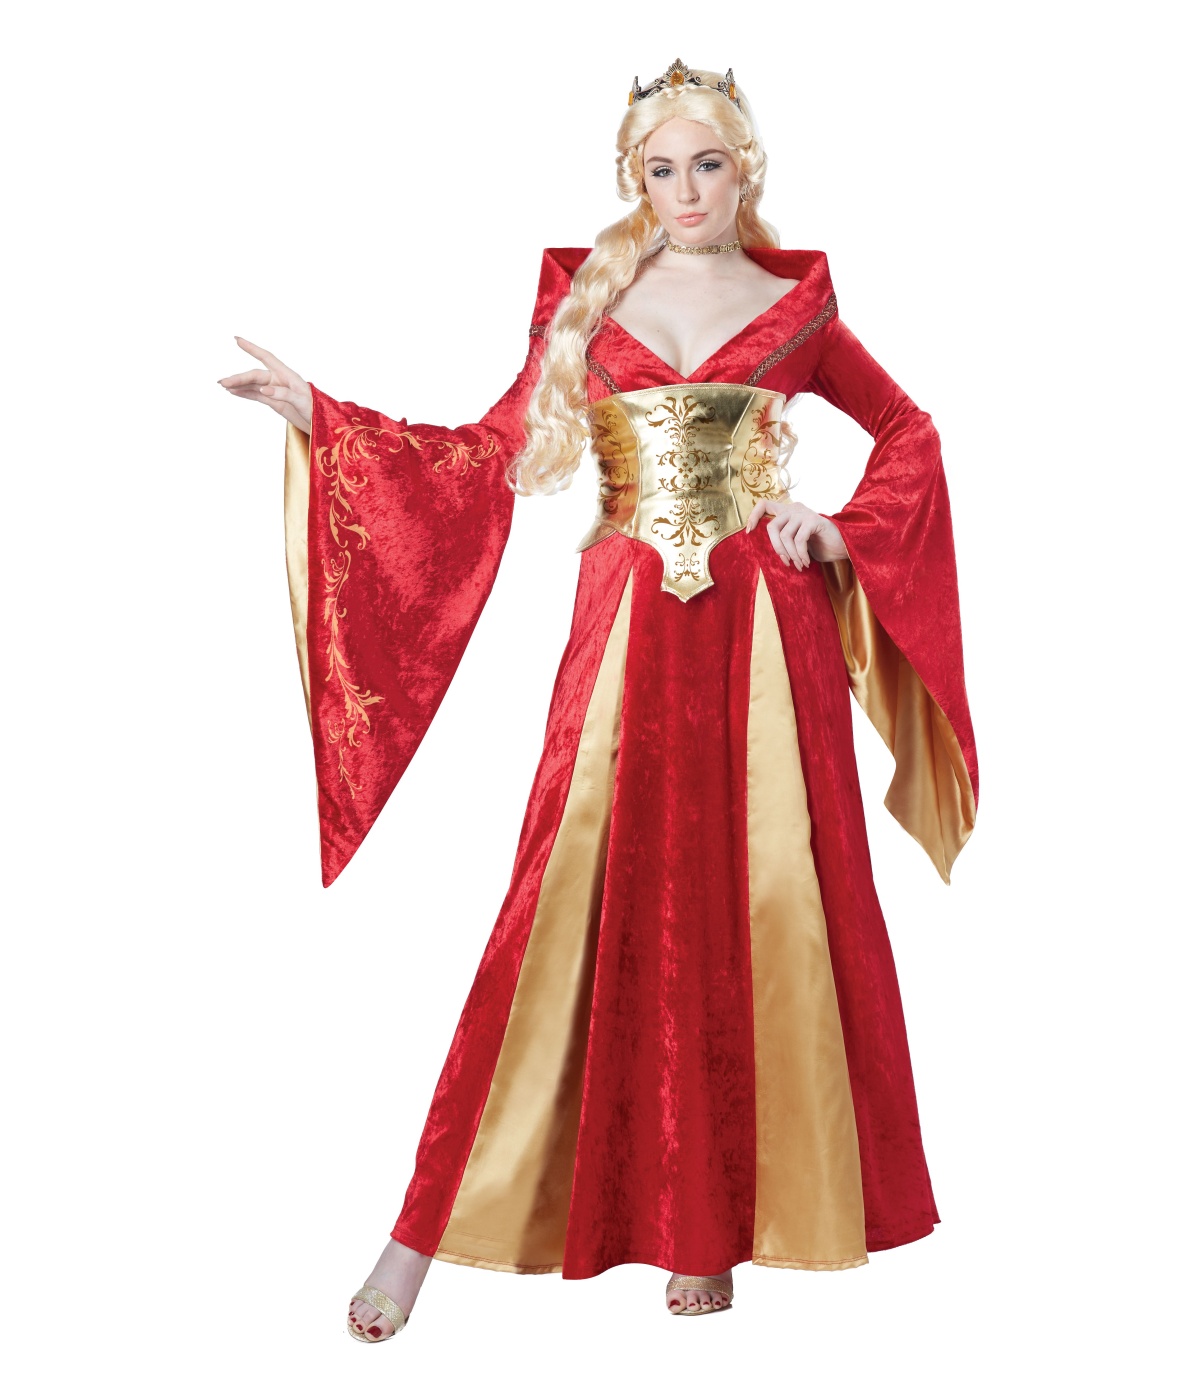  Sophisticated Medieval Queen Woman Costume